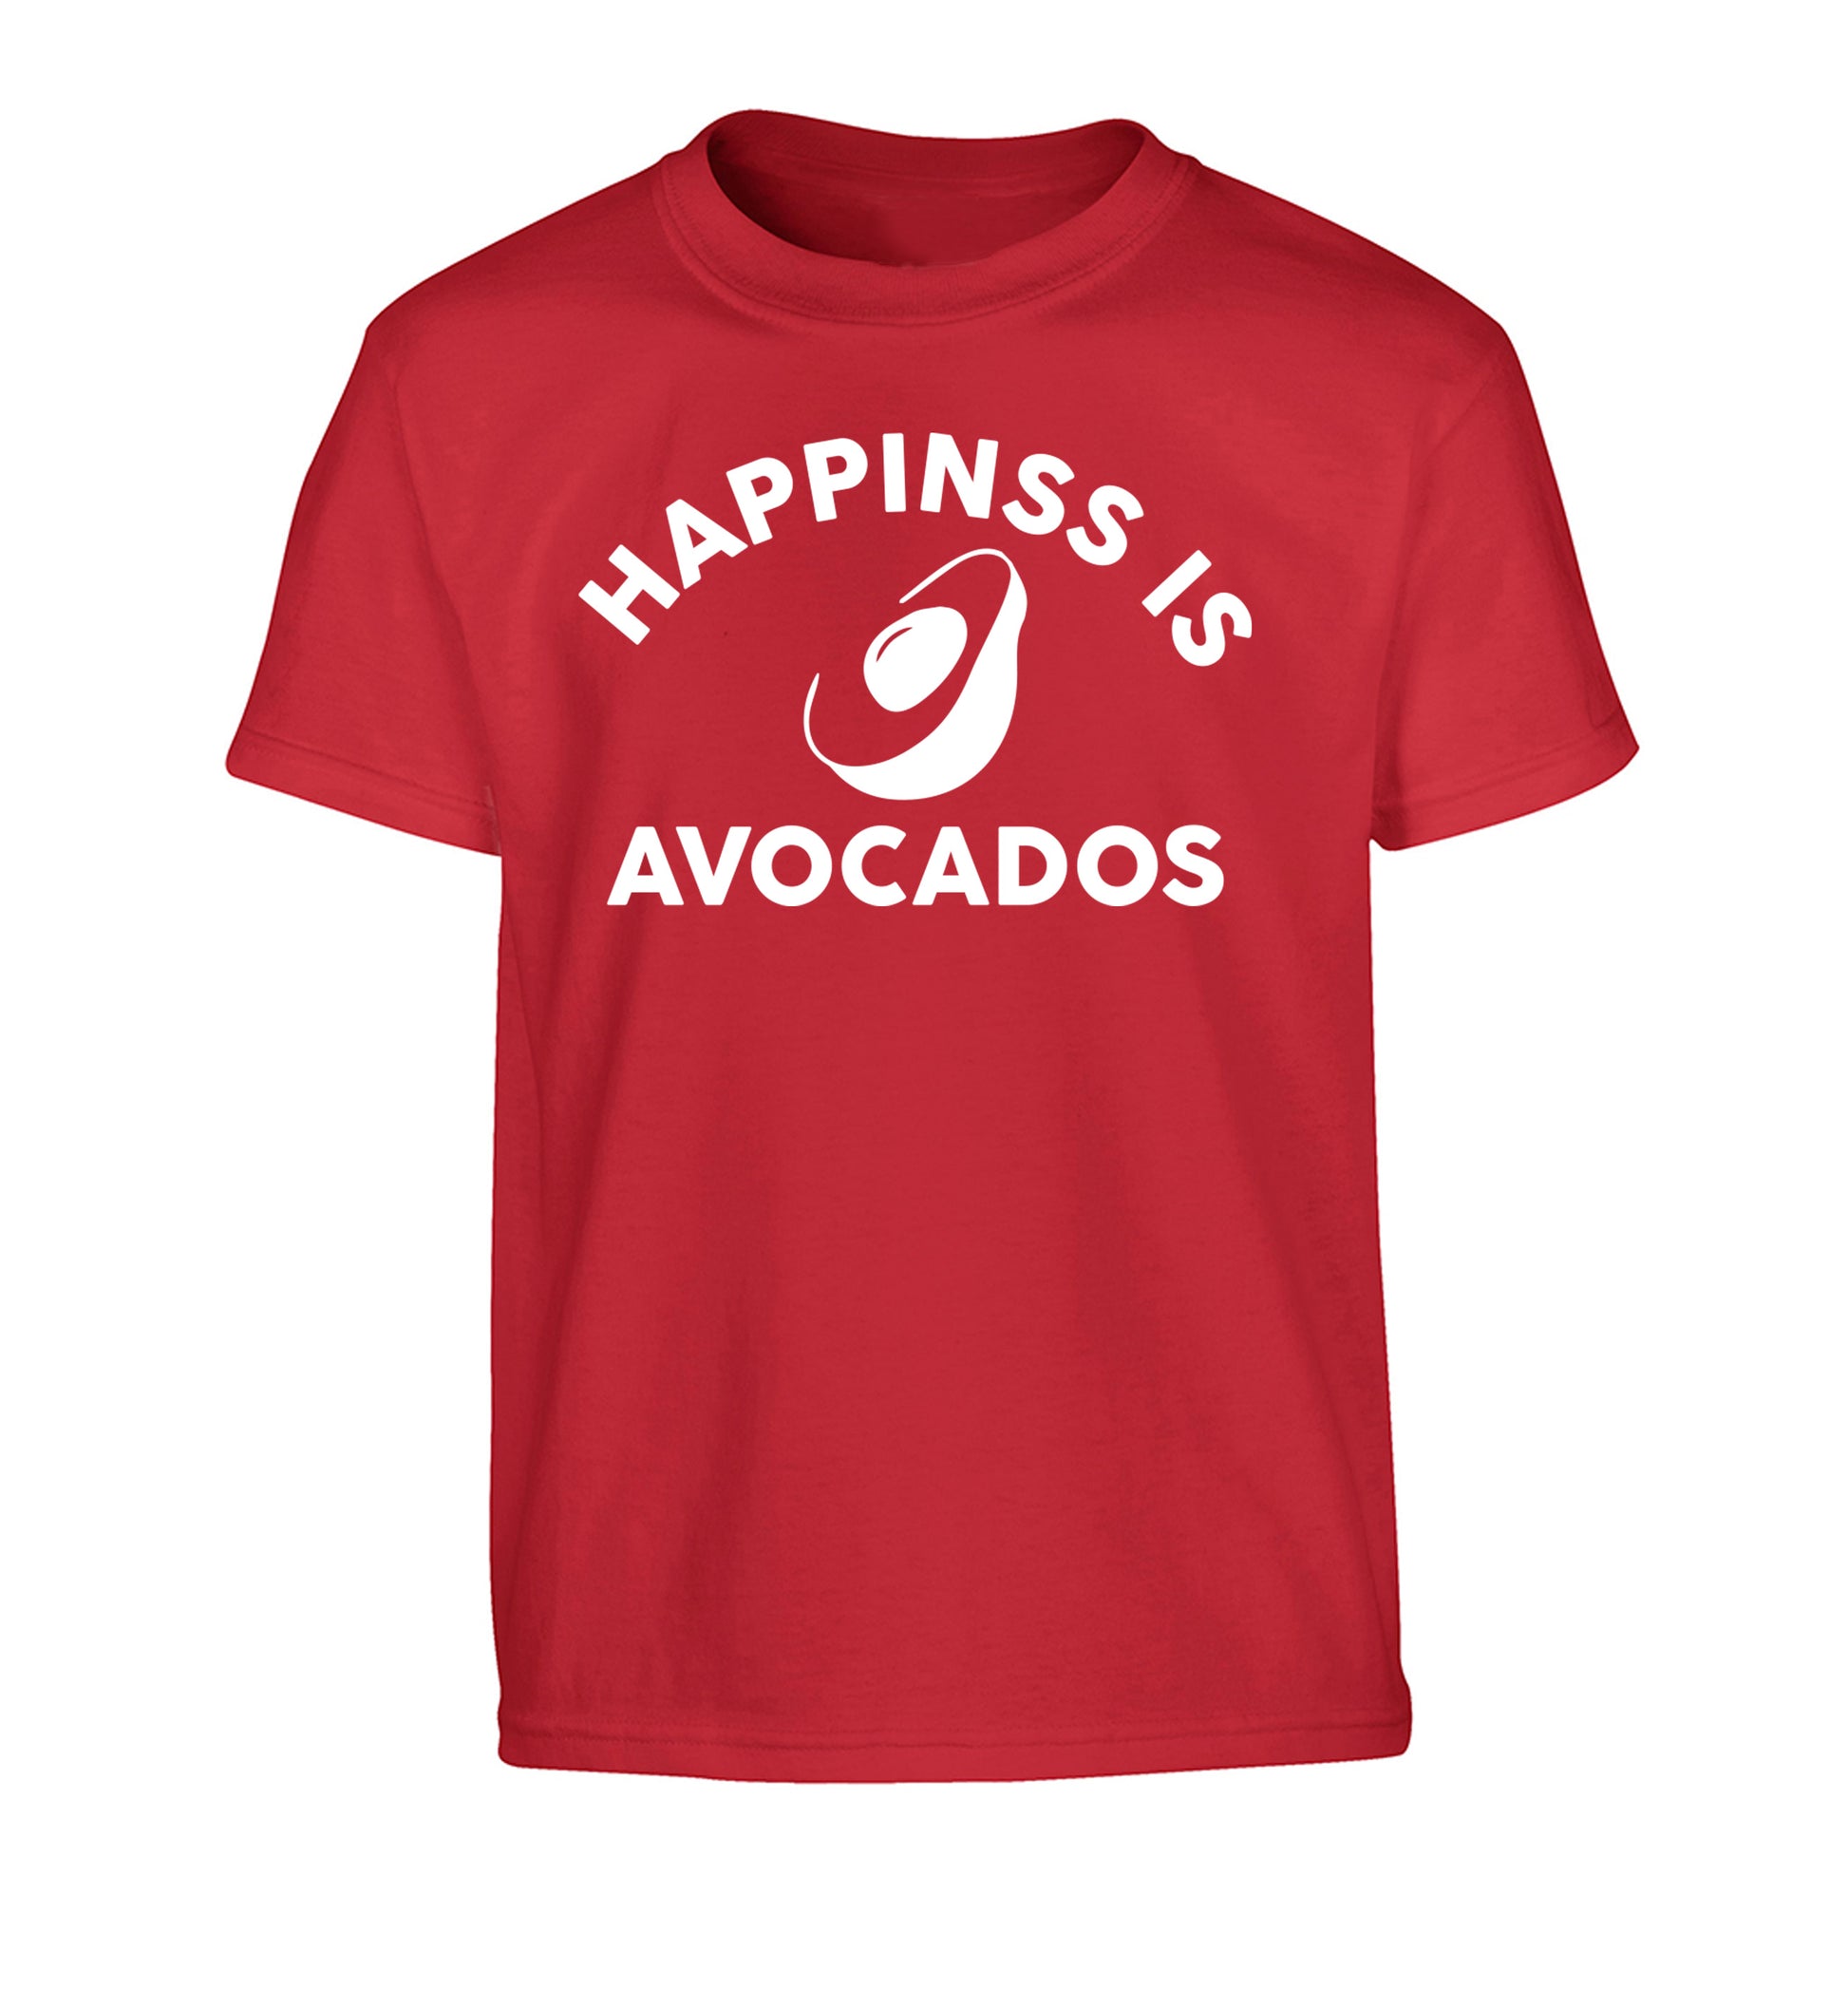 Happiness is avocados Children's red Tshirt 12-14 Years